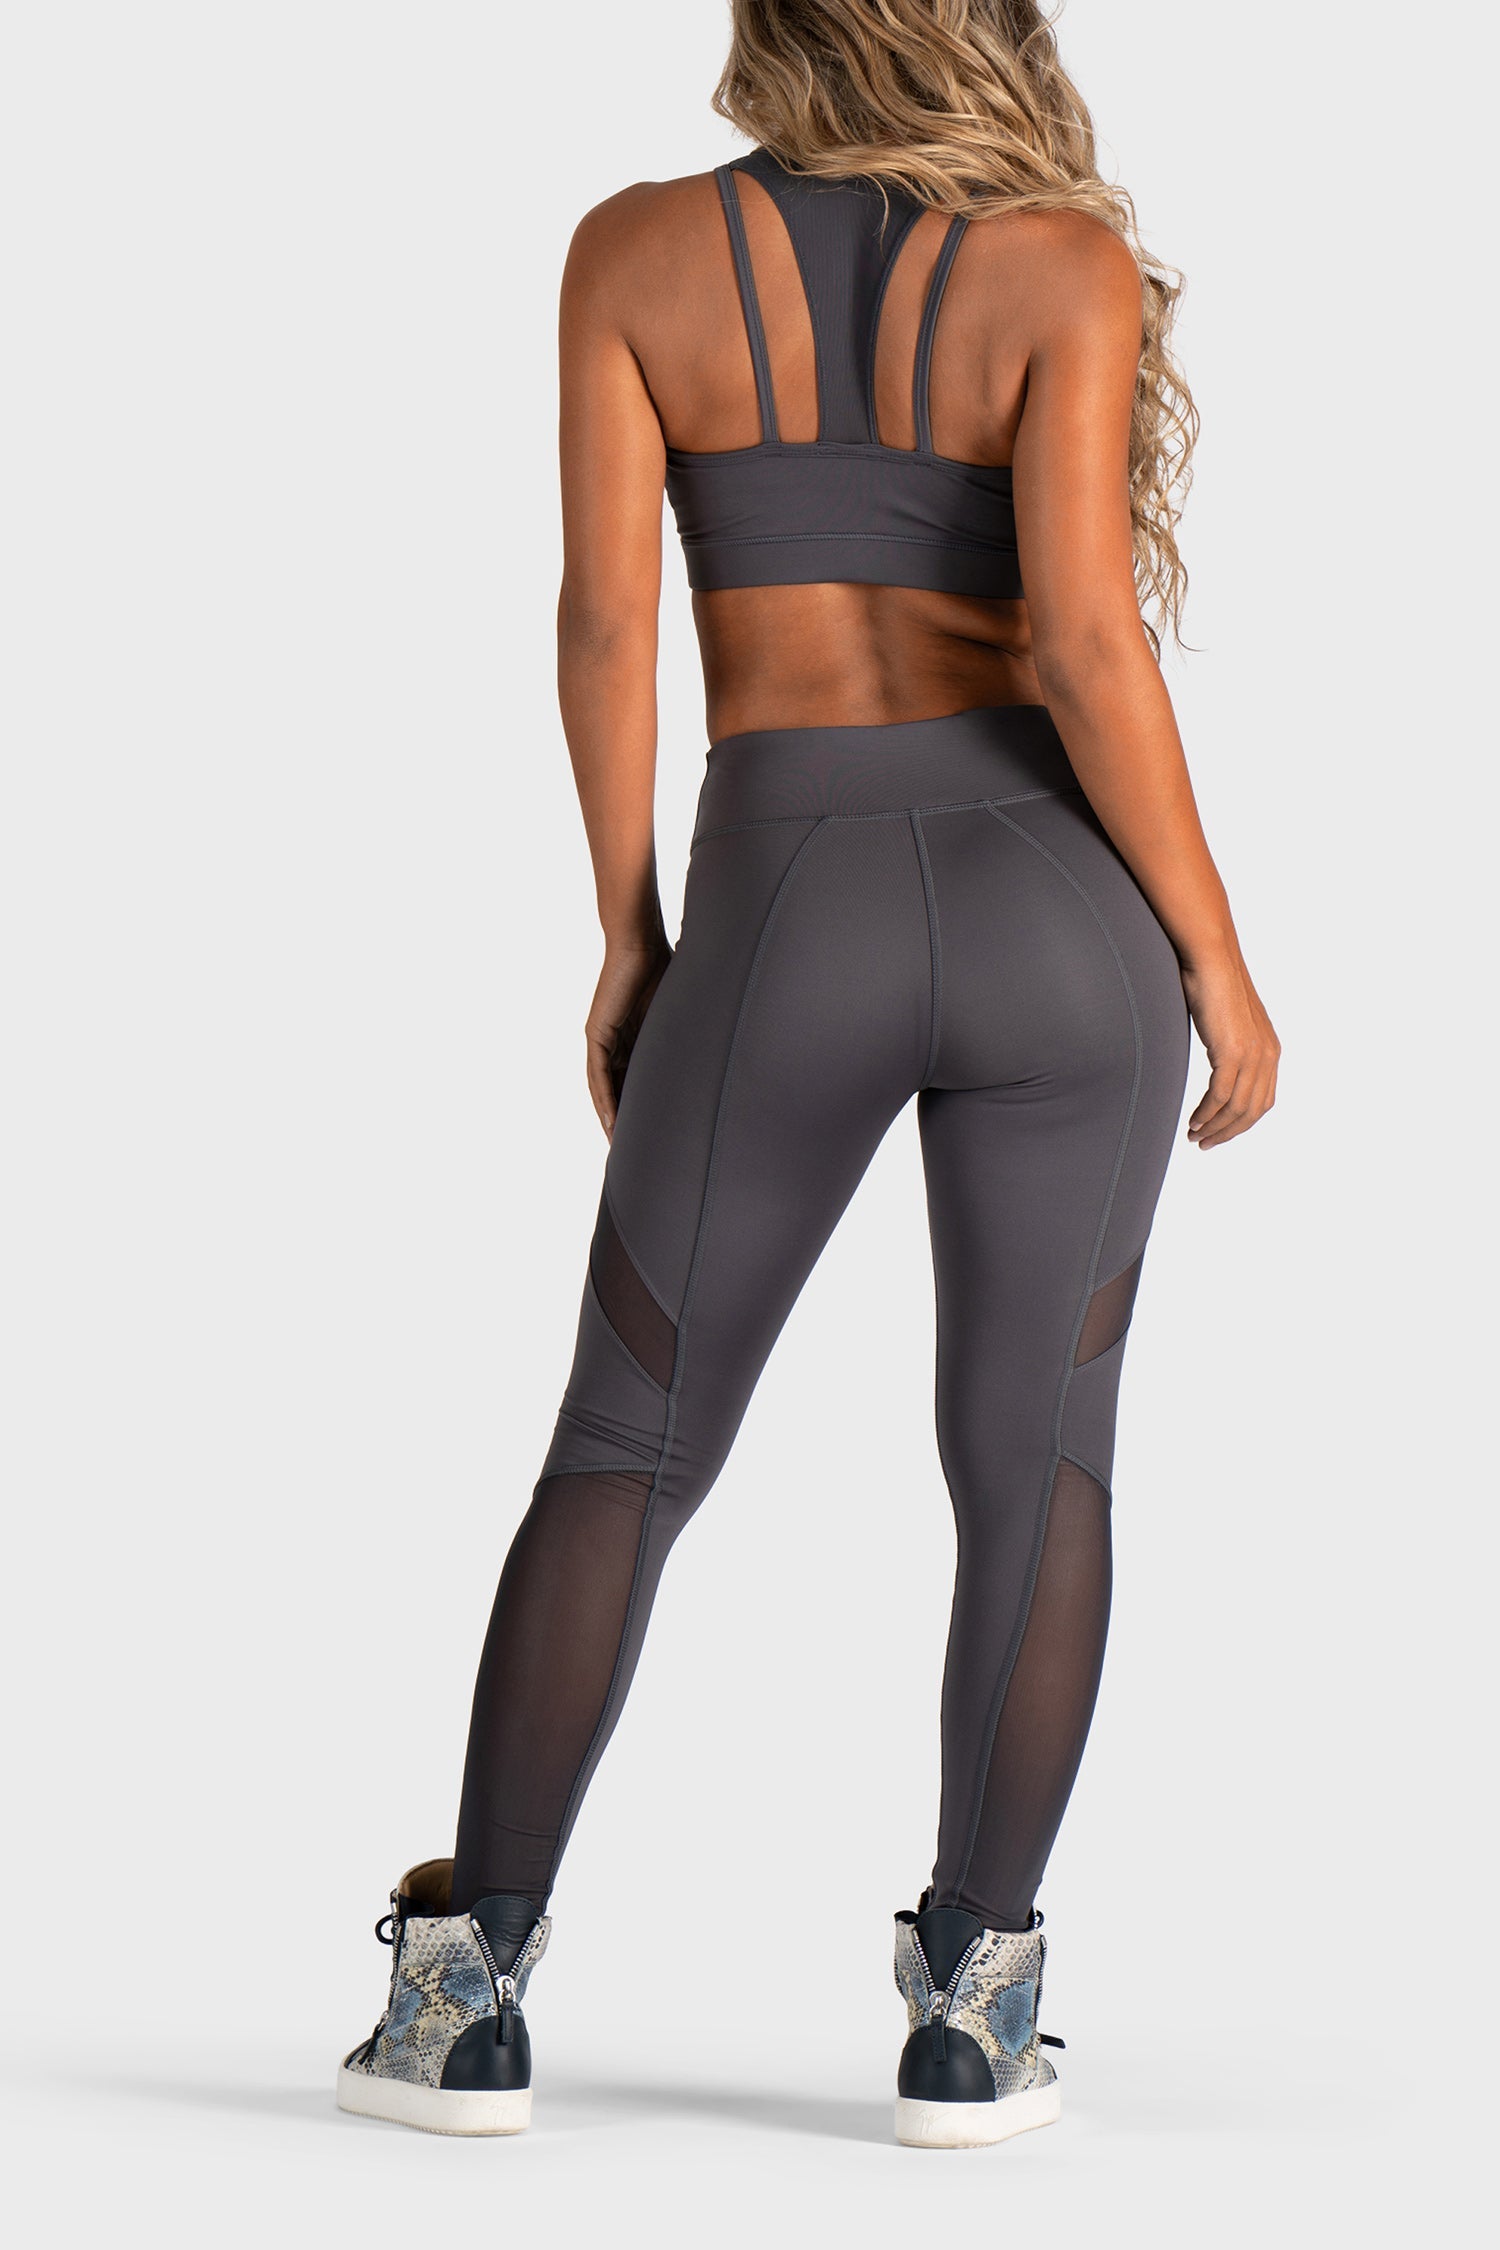 Amplify Legging - Autumn  Workout outfit, Weekend outfit, Preppy